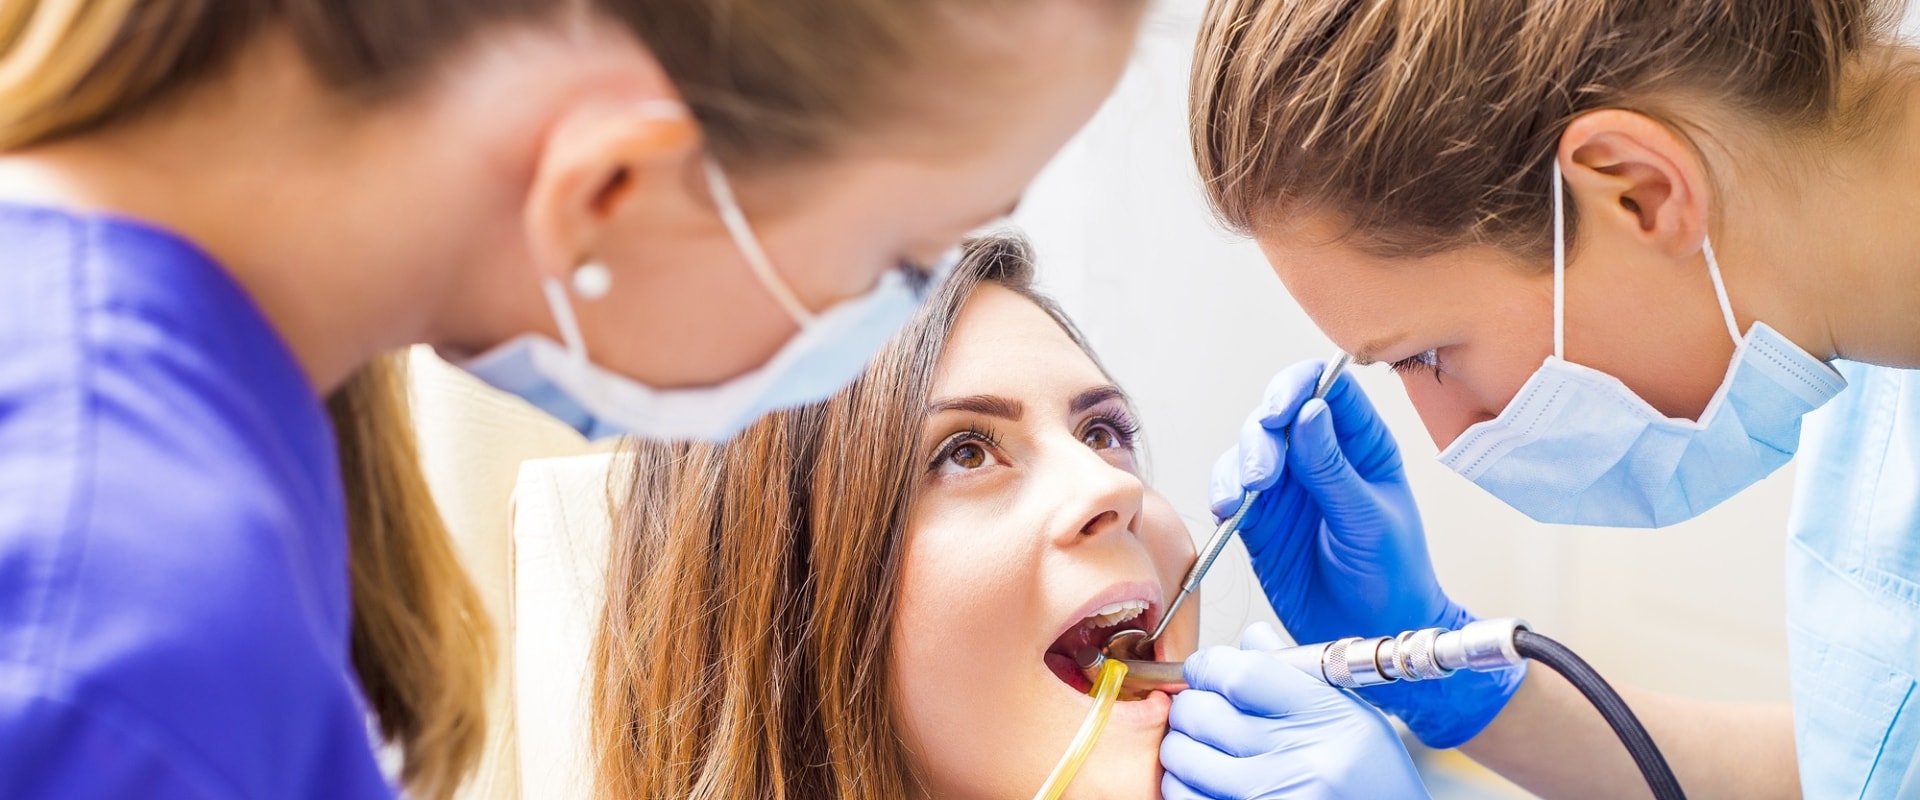 What Are the Best Practices for Teaching Kids Good Dental Hygiene Habits?